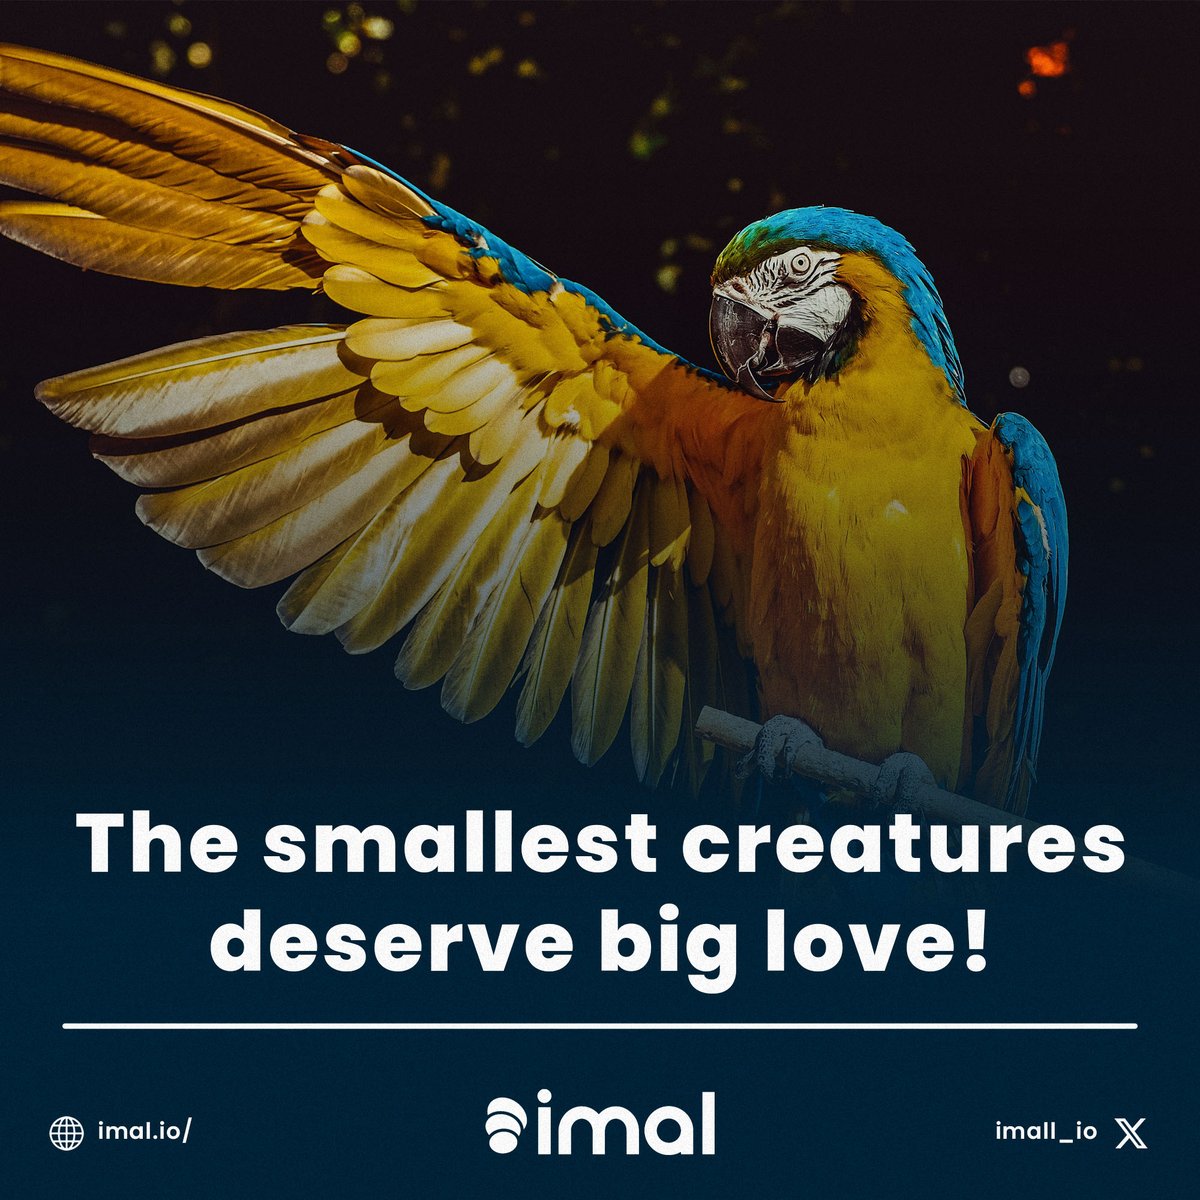 Maybe they are the smallest creatures but they have the biggest heart! #imalProject